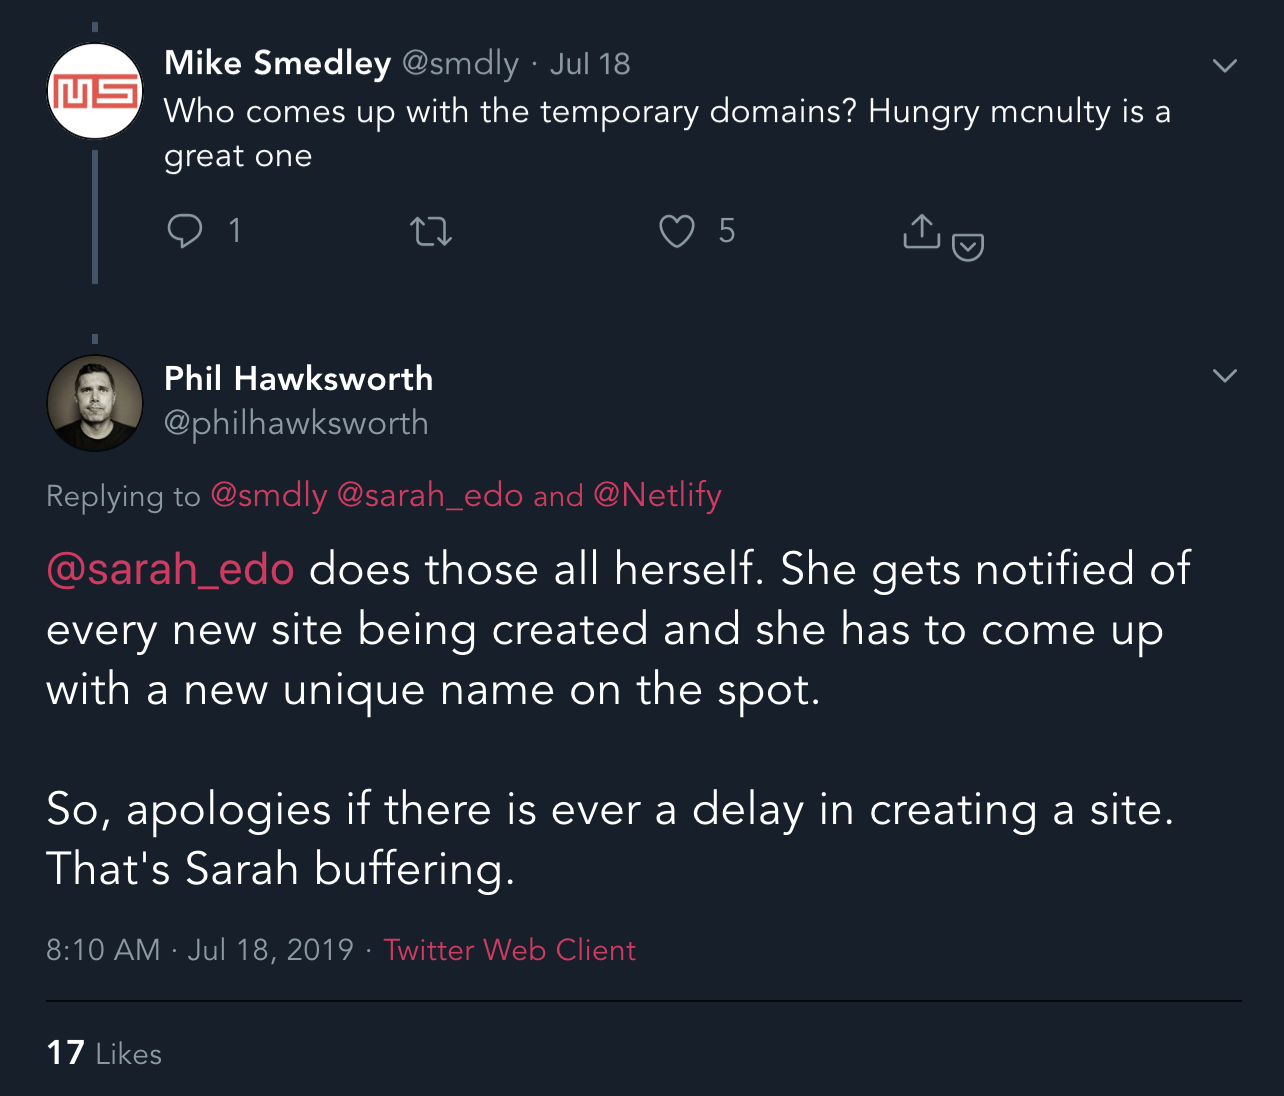 Phil Hawksworth on twitter saying that Sarah thinks up all the site names herself every time a new site is created. And if there's a delay it's called Sarah buffering